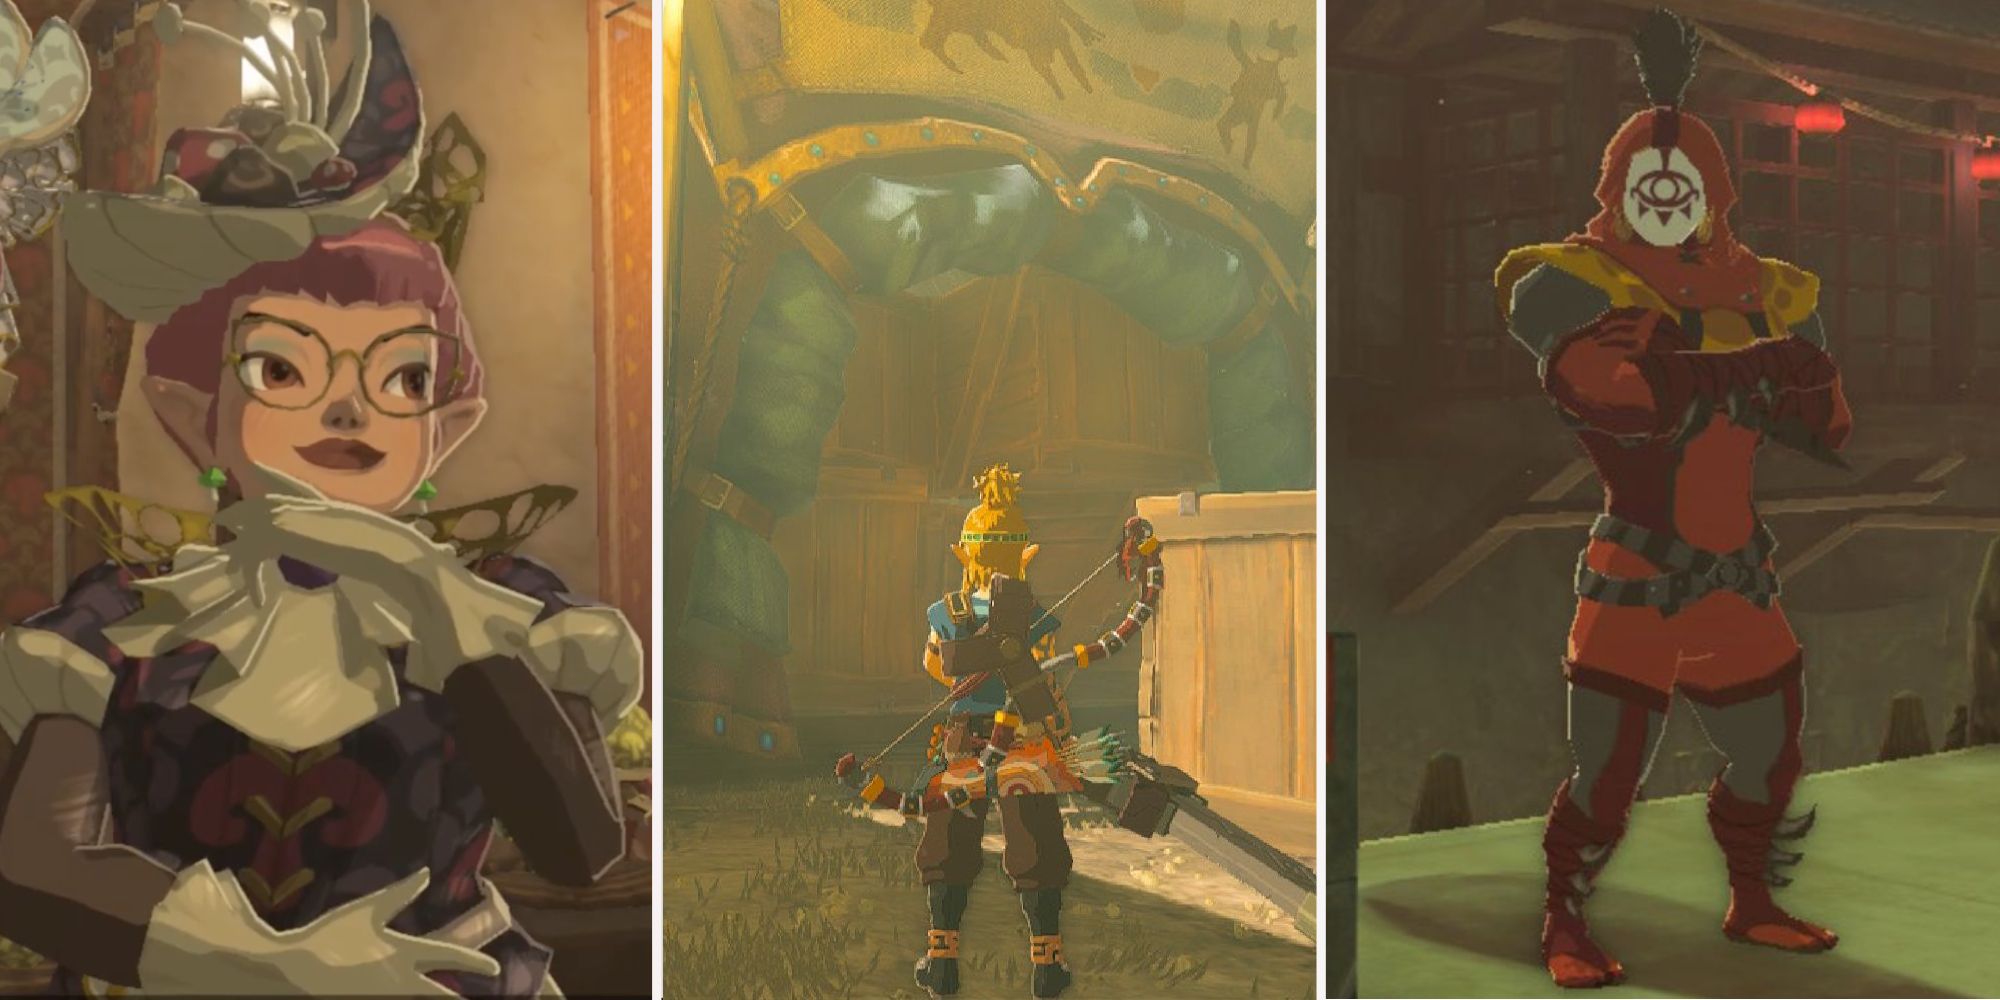 TOTK cece link and yiga in a split image